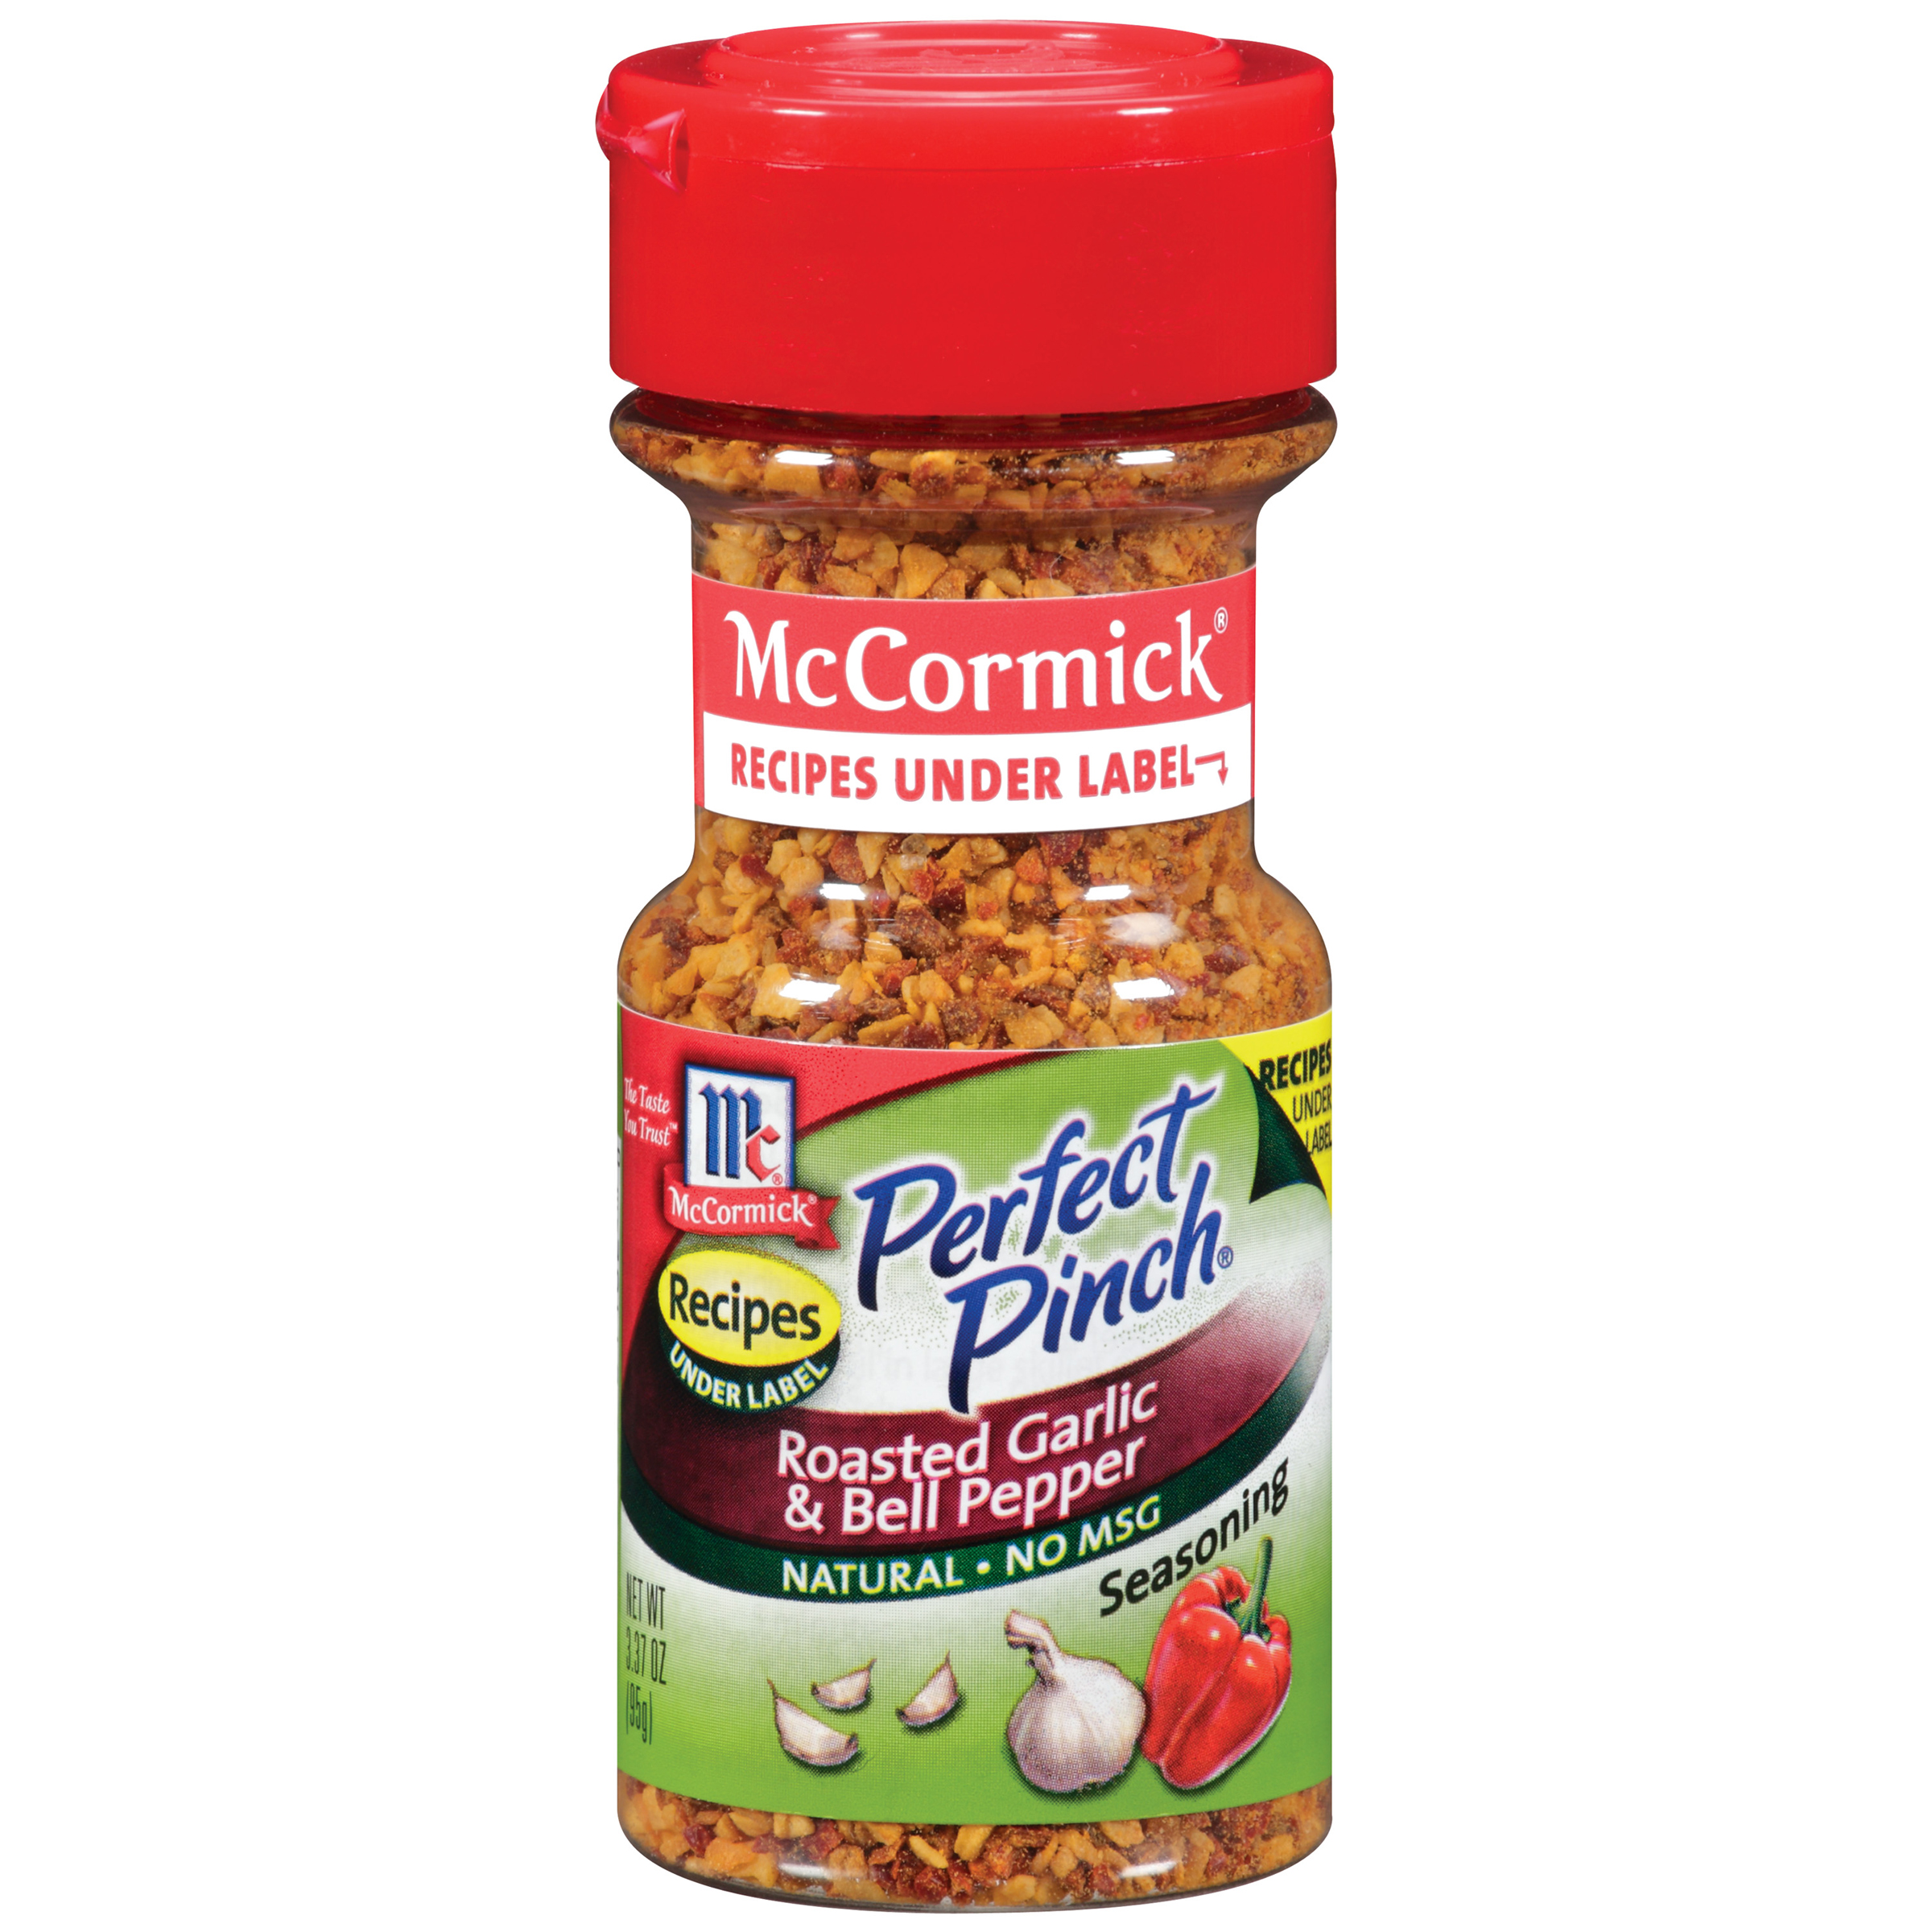 McCormick Perfect Pinch Roasted Garlic & Bell Pepper 3.37 oz